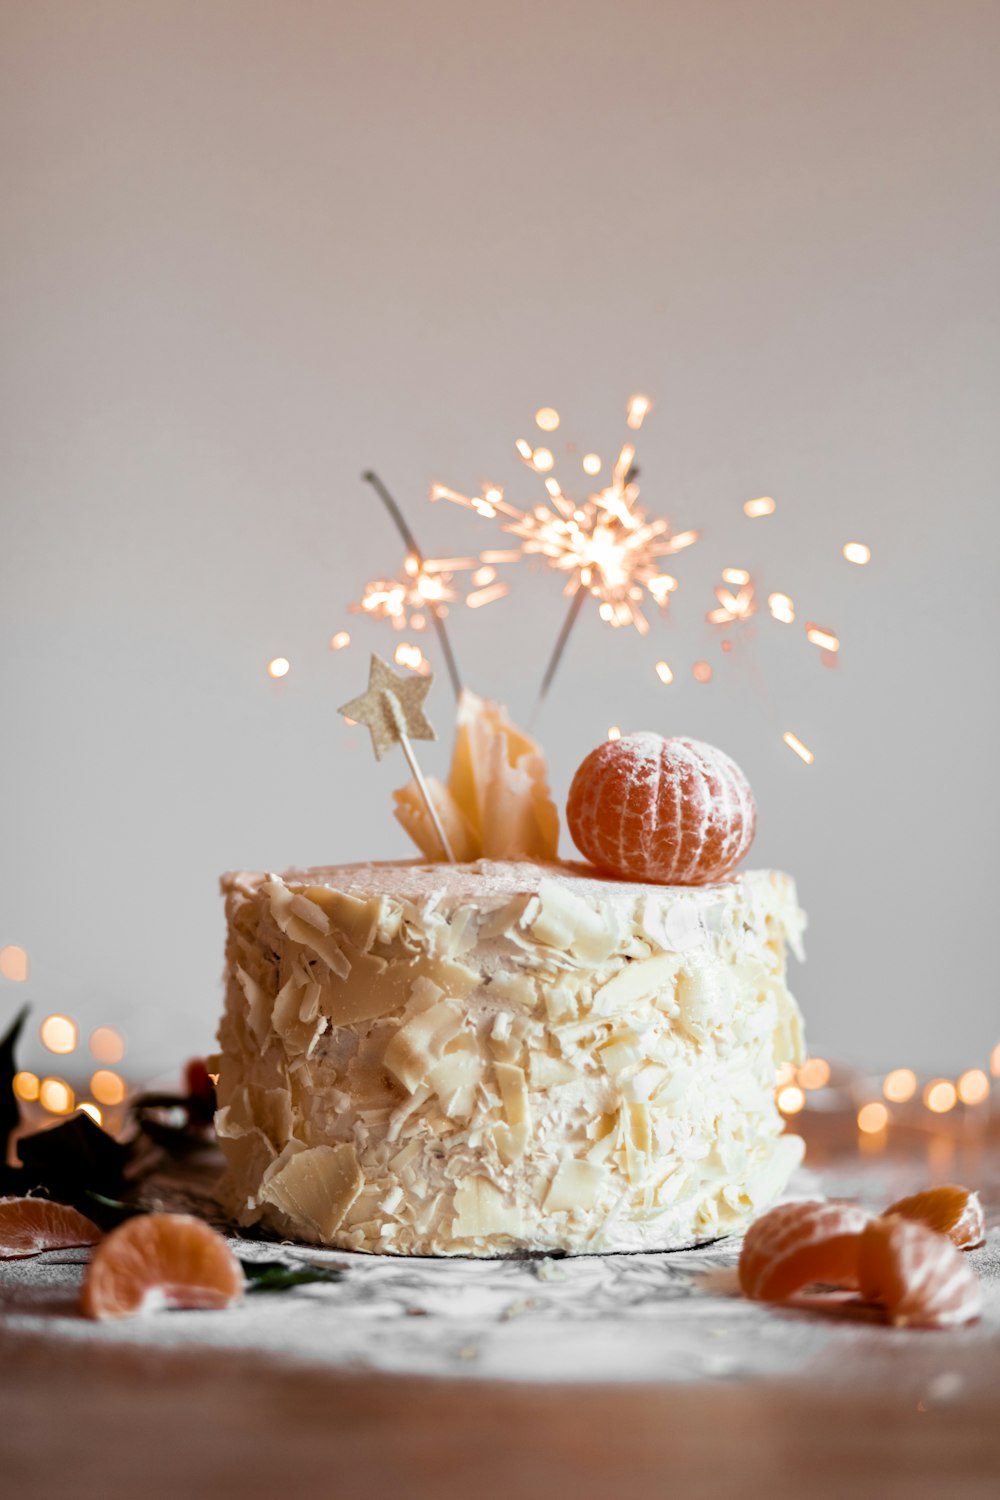 100+ Birthday Cake Pictures | Download Free Images & Stock Photos ...